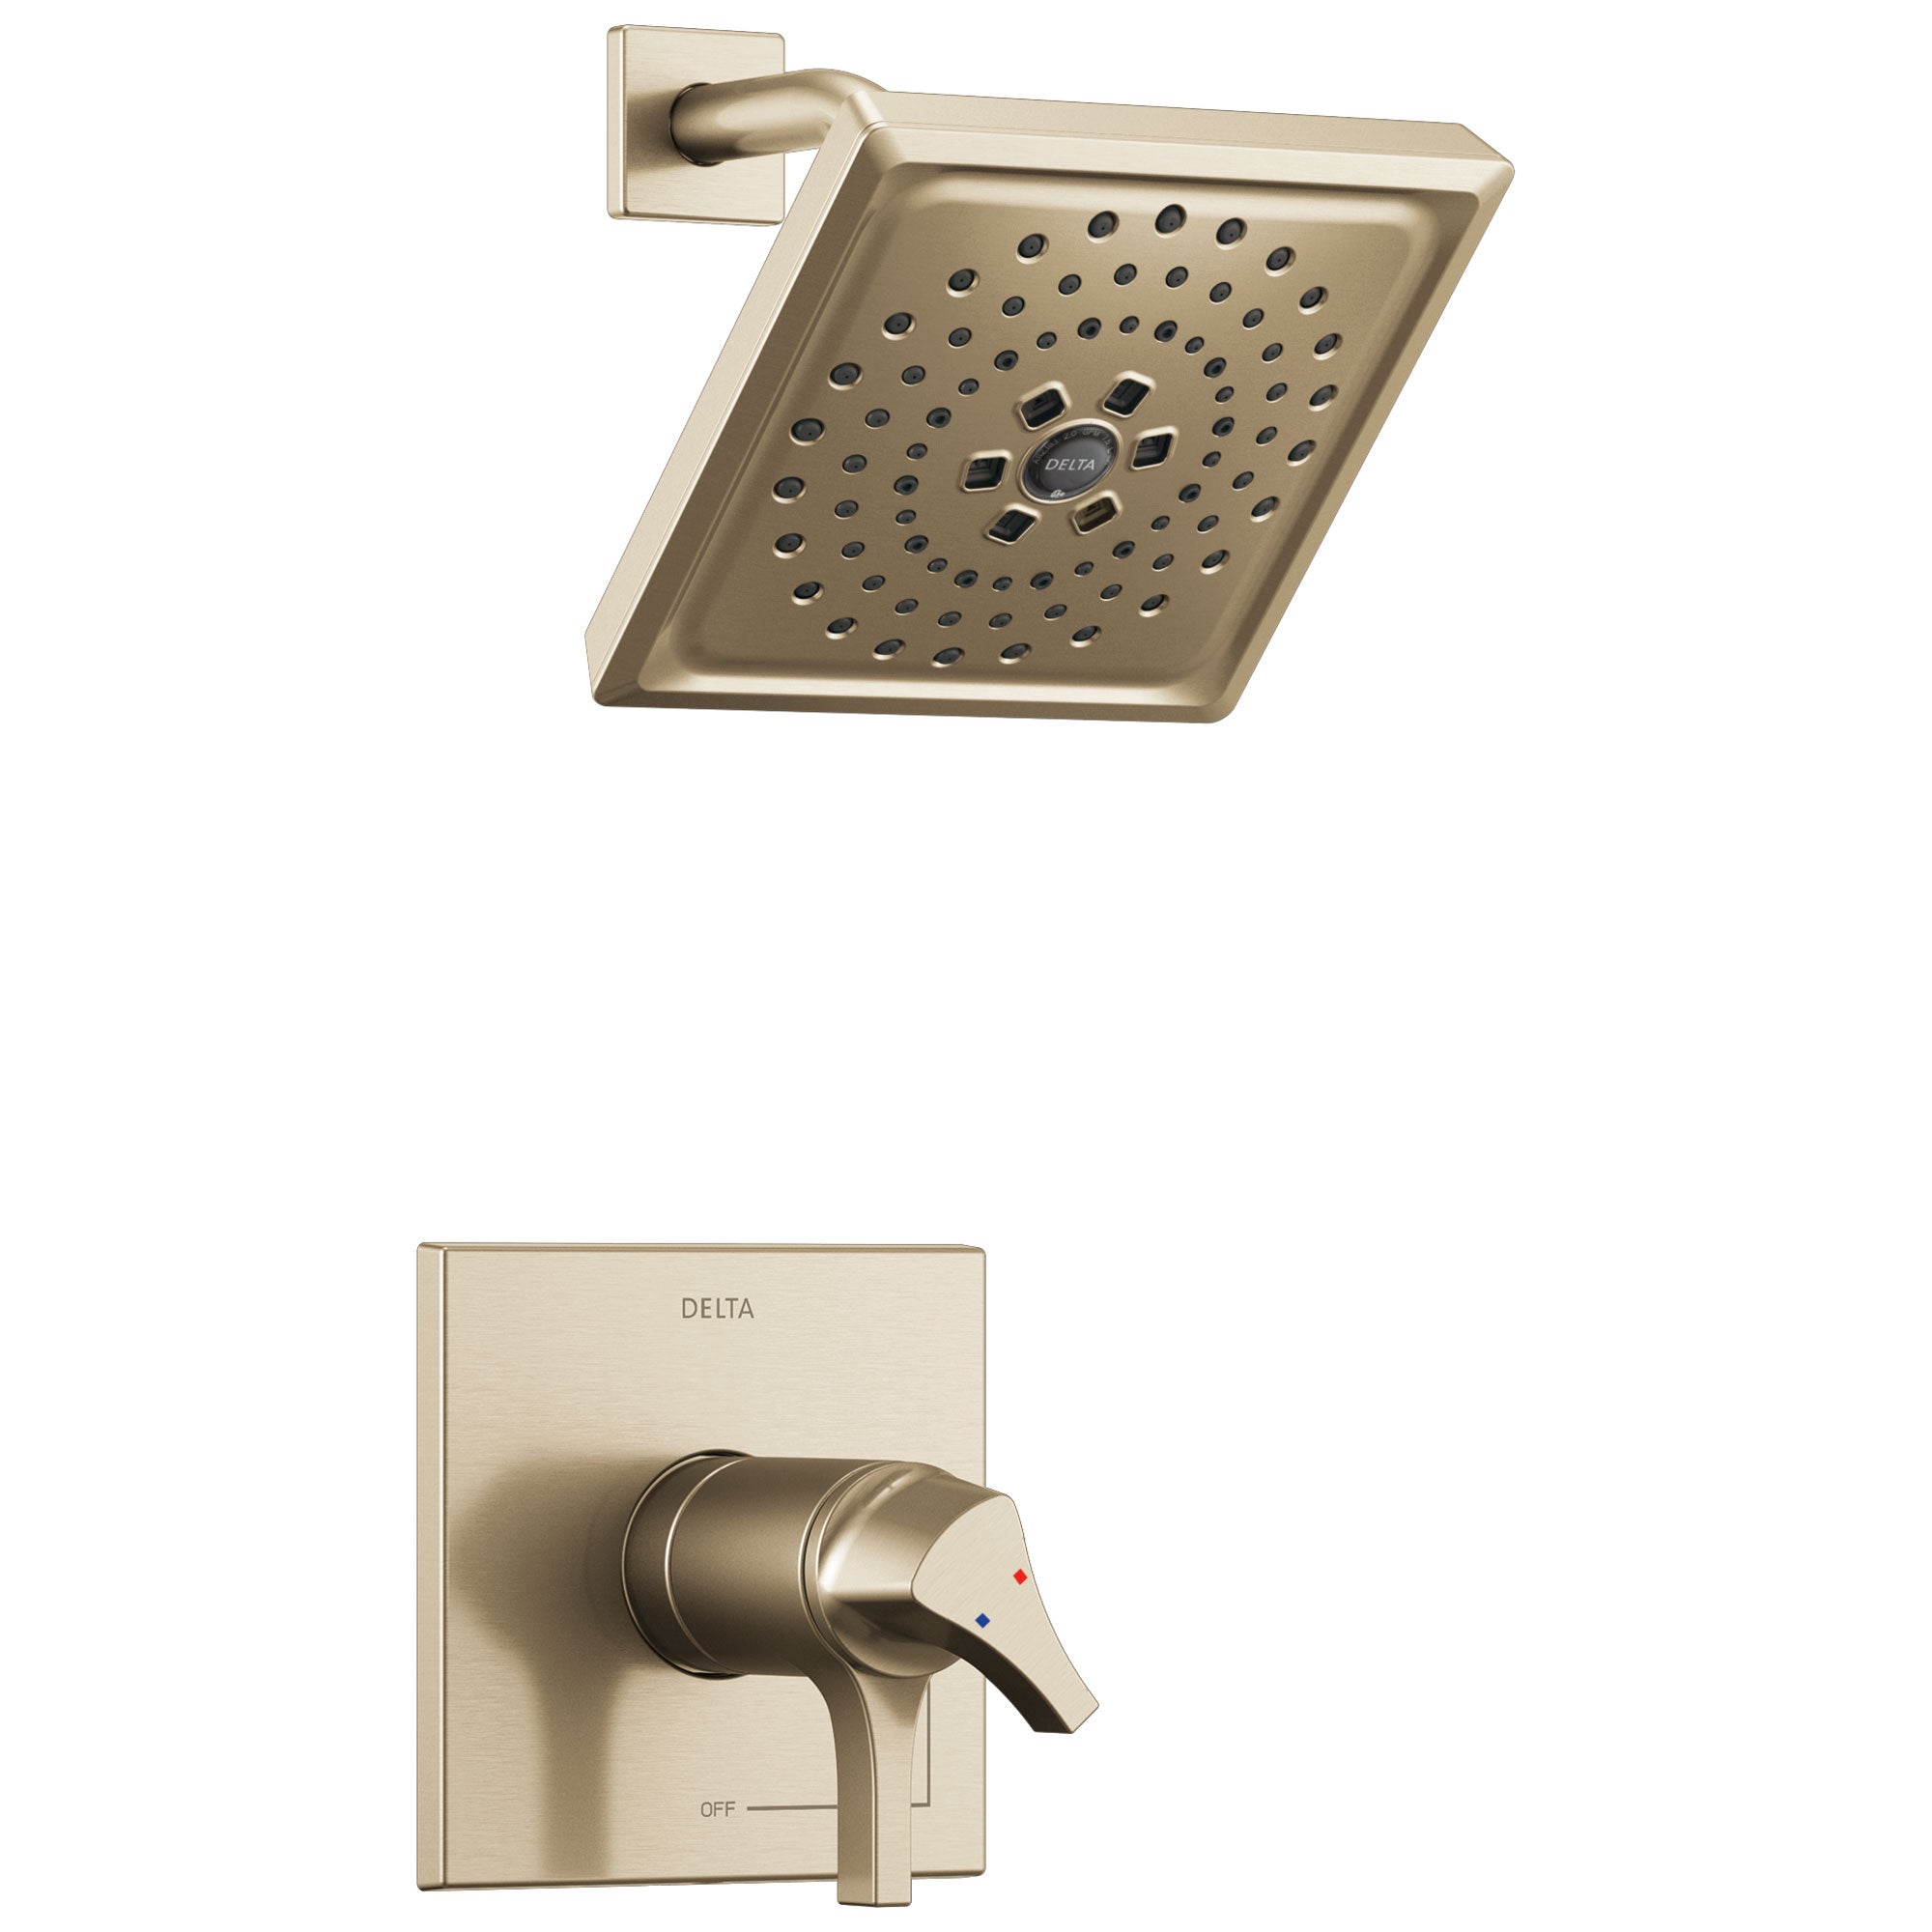 Delta Zura Champagne Bronze Finish TempAssure 17T Series Shower only Faucet Includes Handles, Cartridge, and Rough-in Valve without Stops D3000V